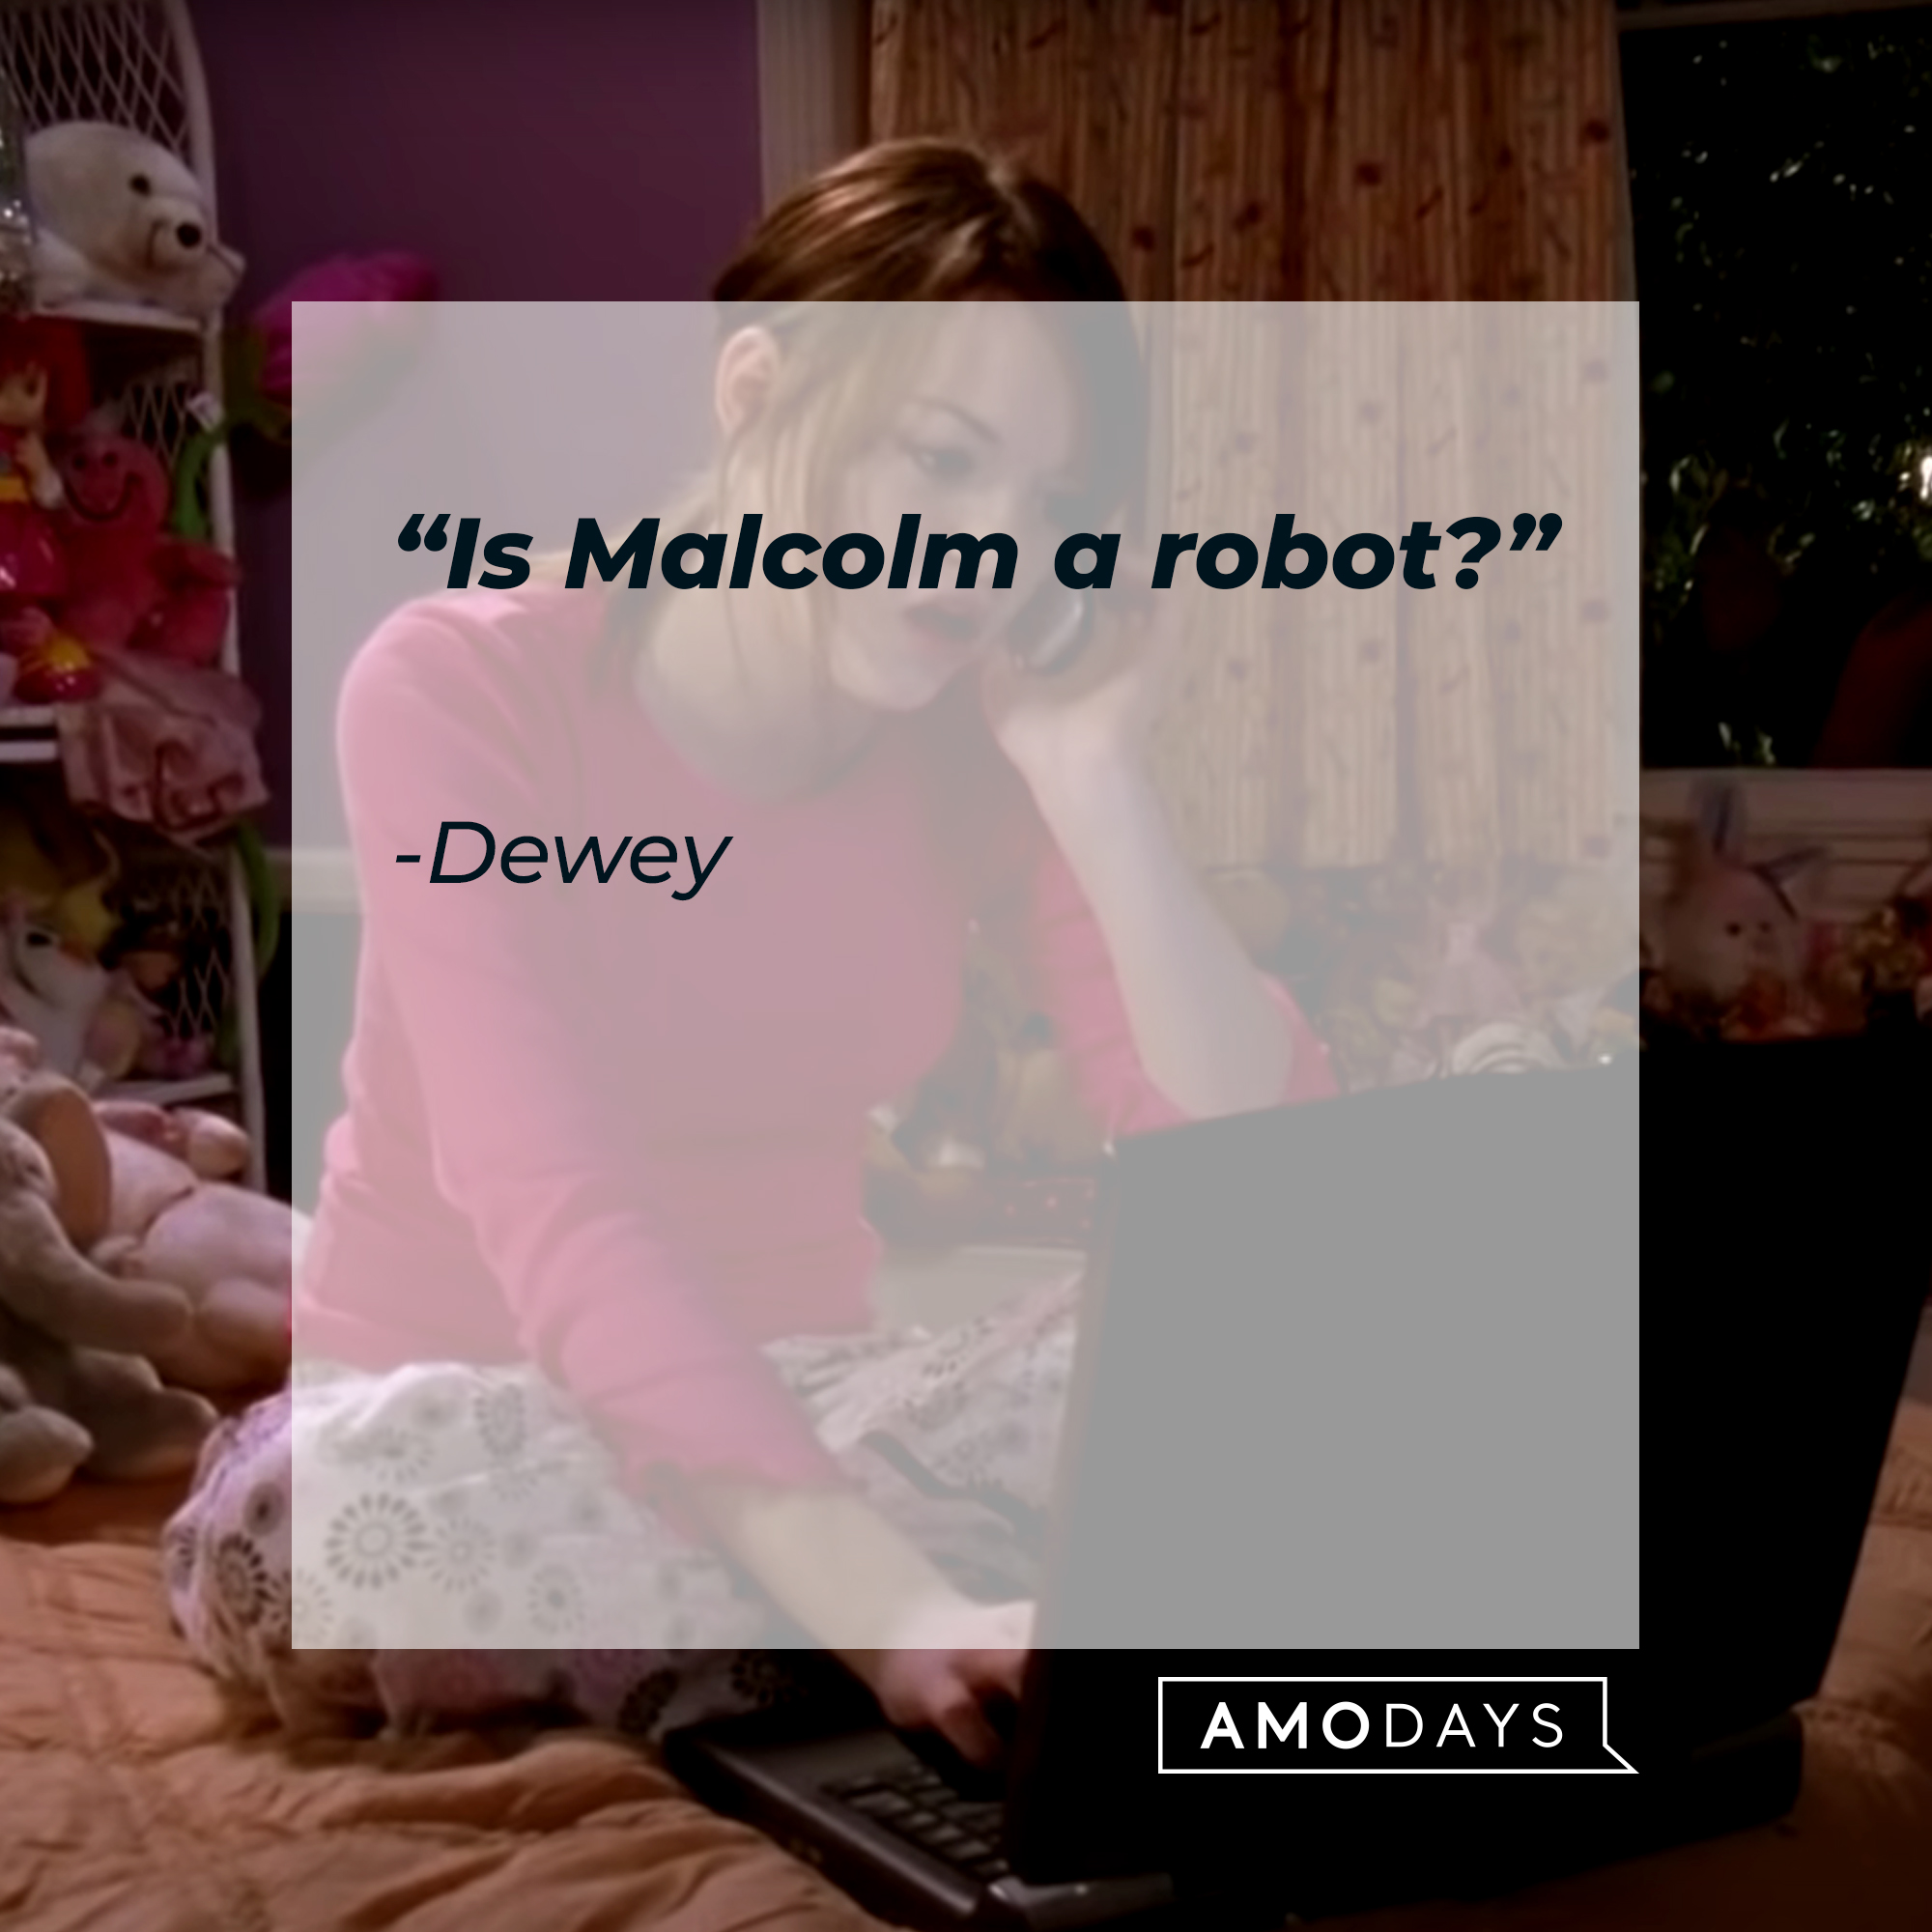 A "Malcolm in the Middle" character with Dewey's quote: “Is Malcolm a robot?” | Source: YouTube.com/Channel4